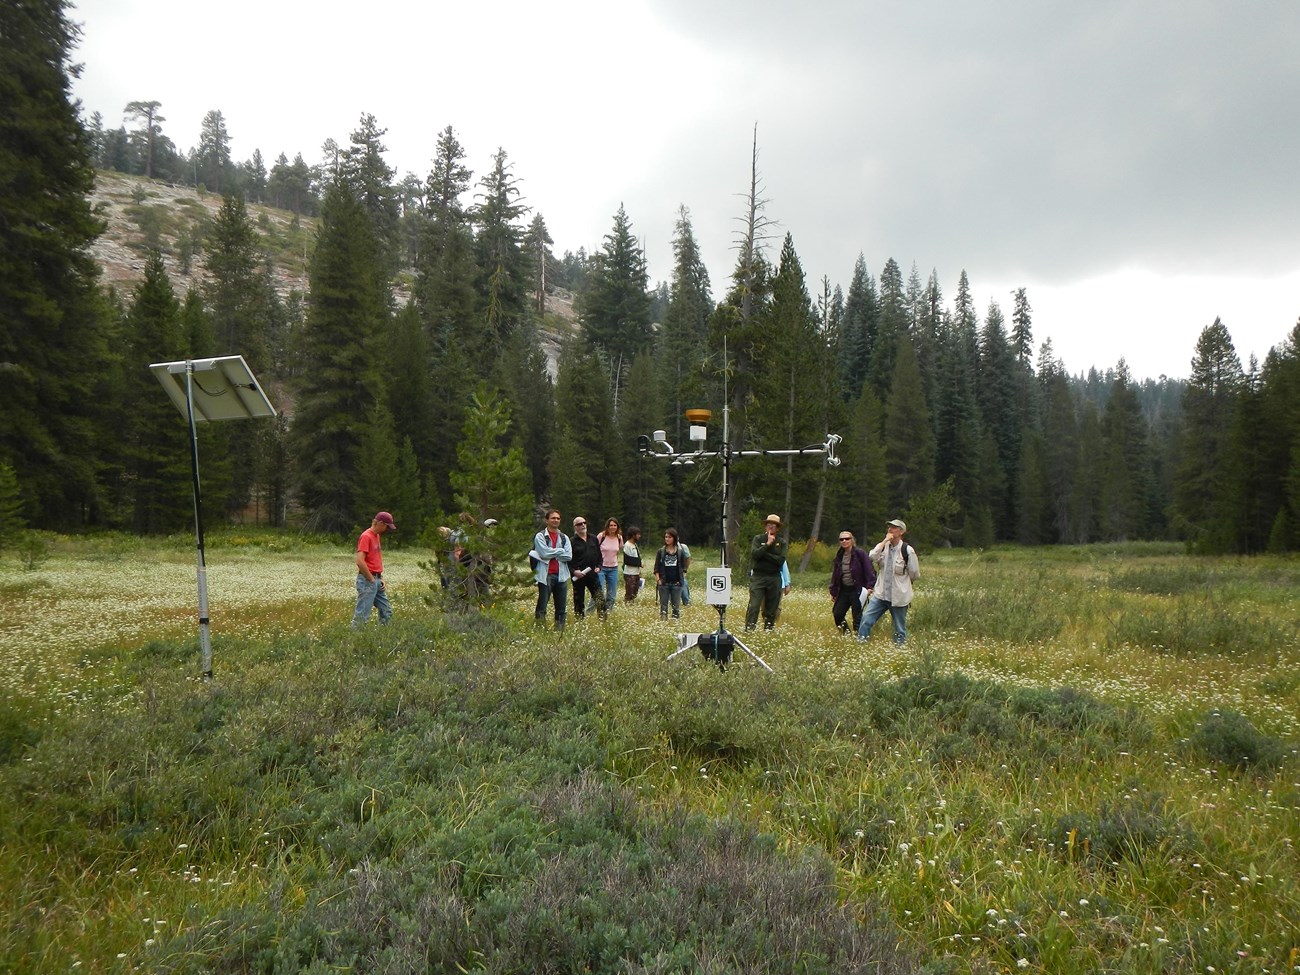 Scientists examine park meteorological station in Sequoia National Park.